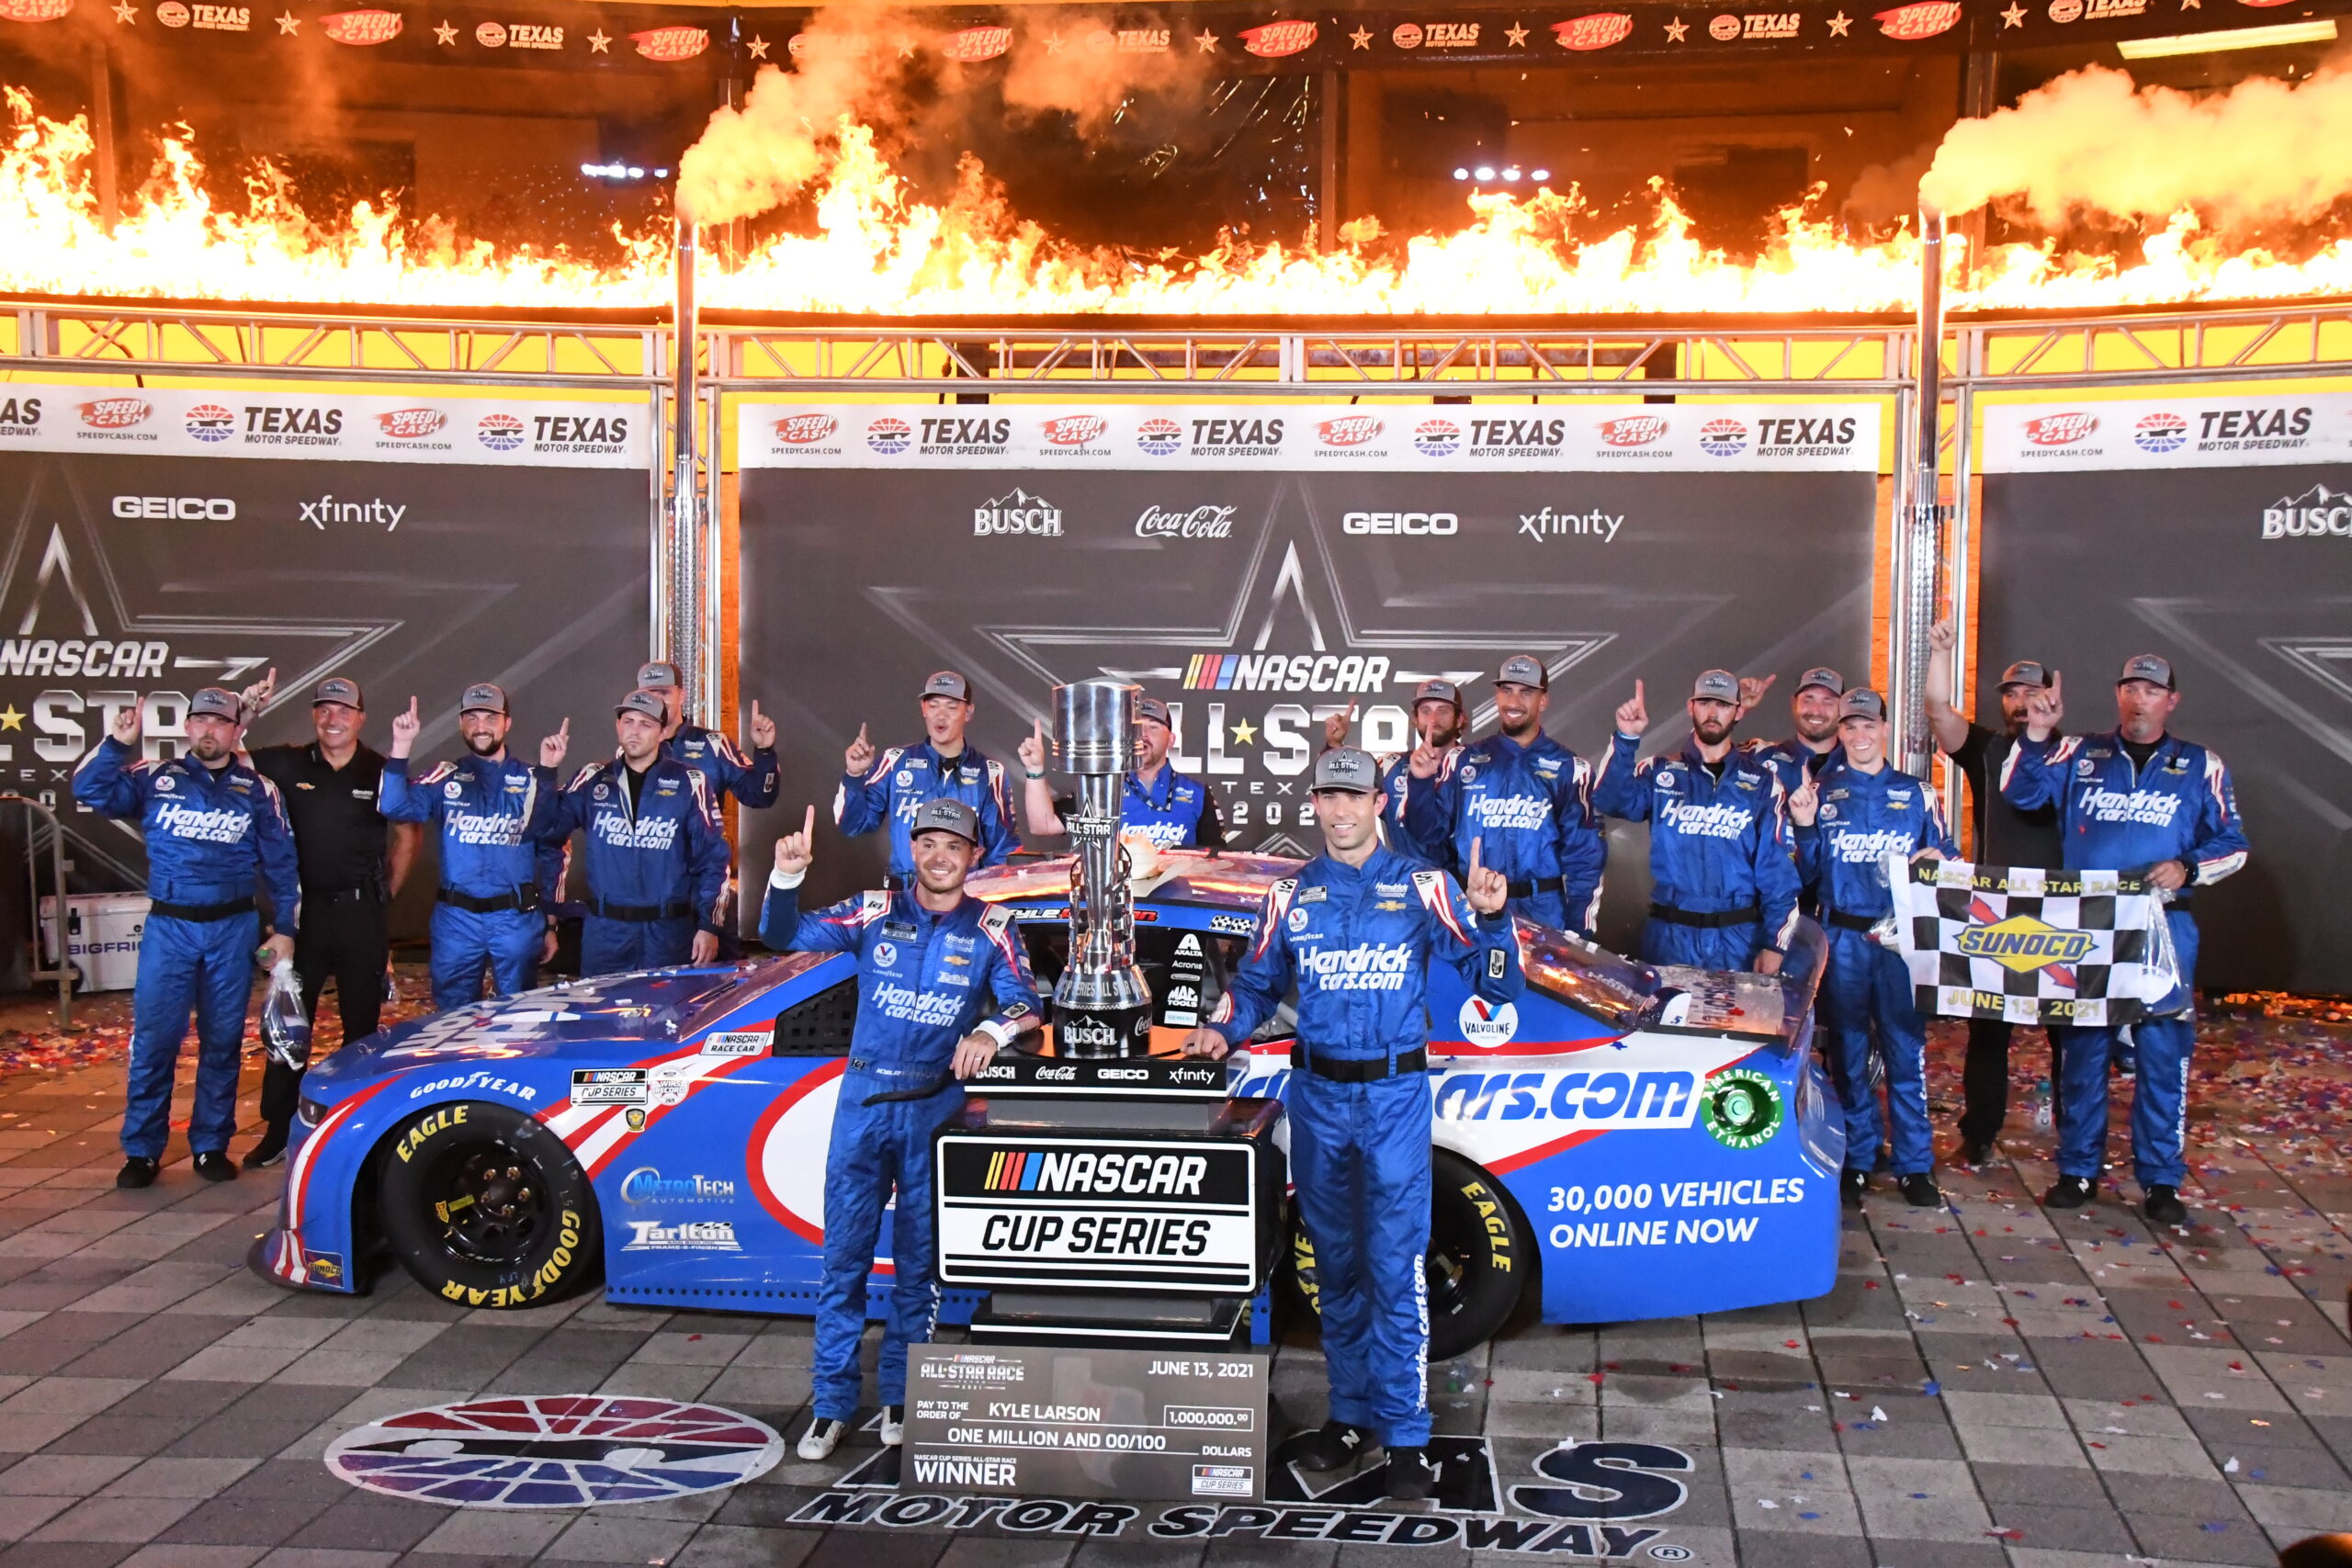 While the competition keeps chipping away, Kyle Larson and his No. 5 team continually send it. (Photo: Sean Folsom/The Podium Finish)